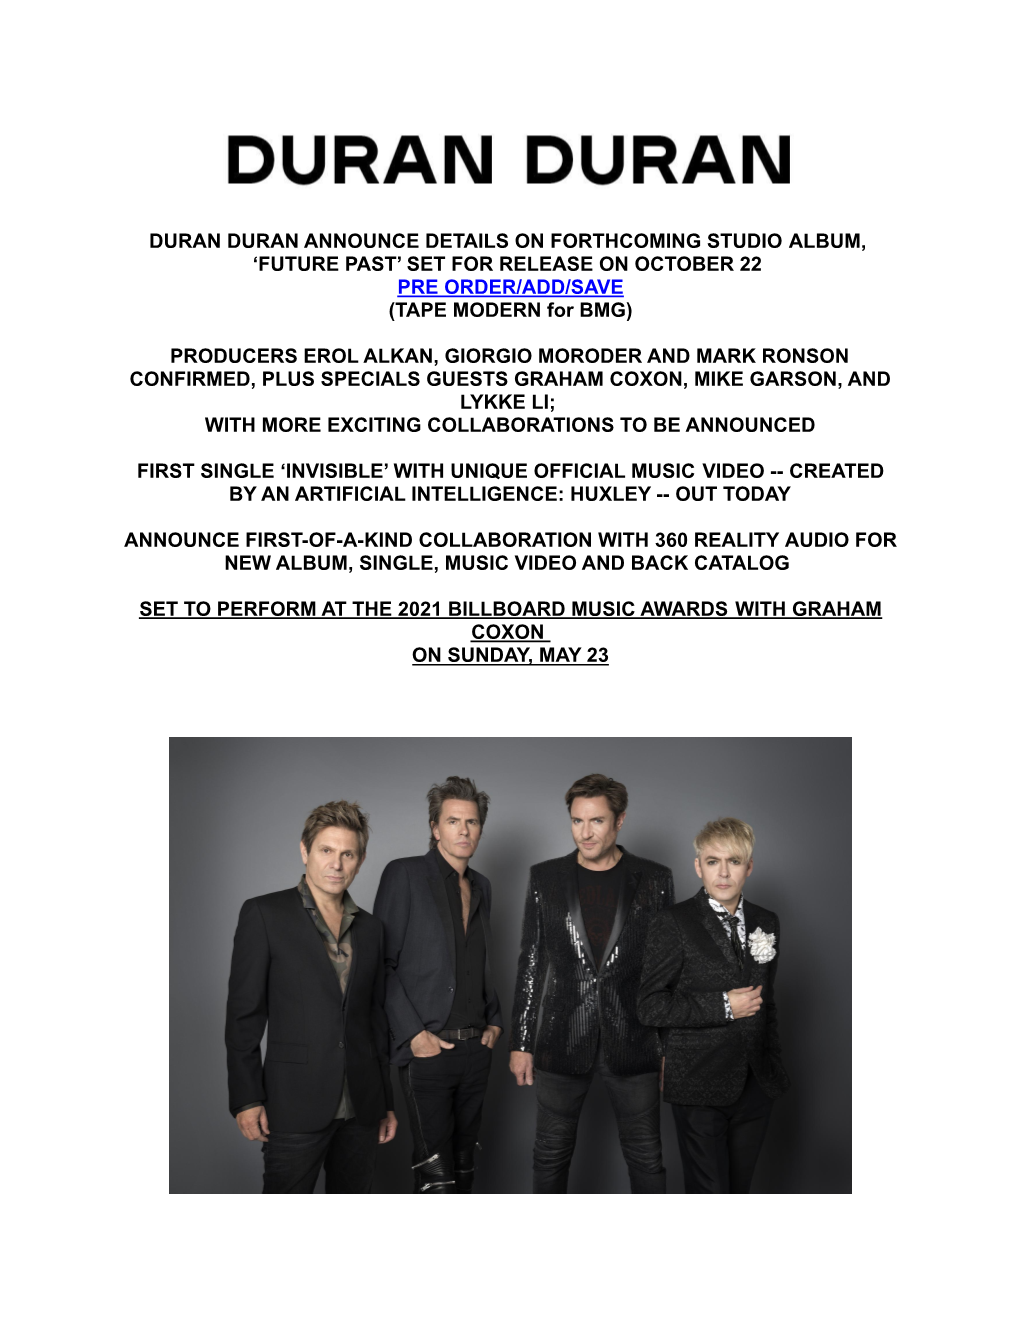 Duran Duran Announce Details on Forthcoming Studio Album, 'Future Past'